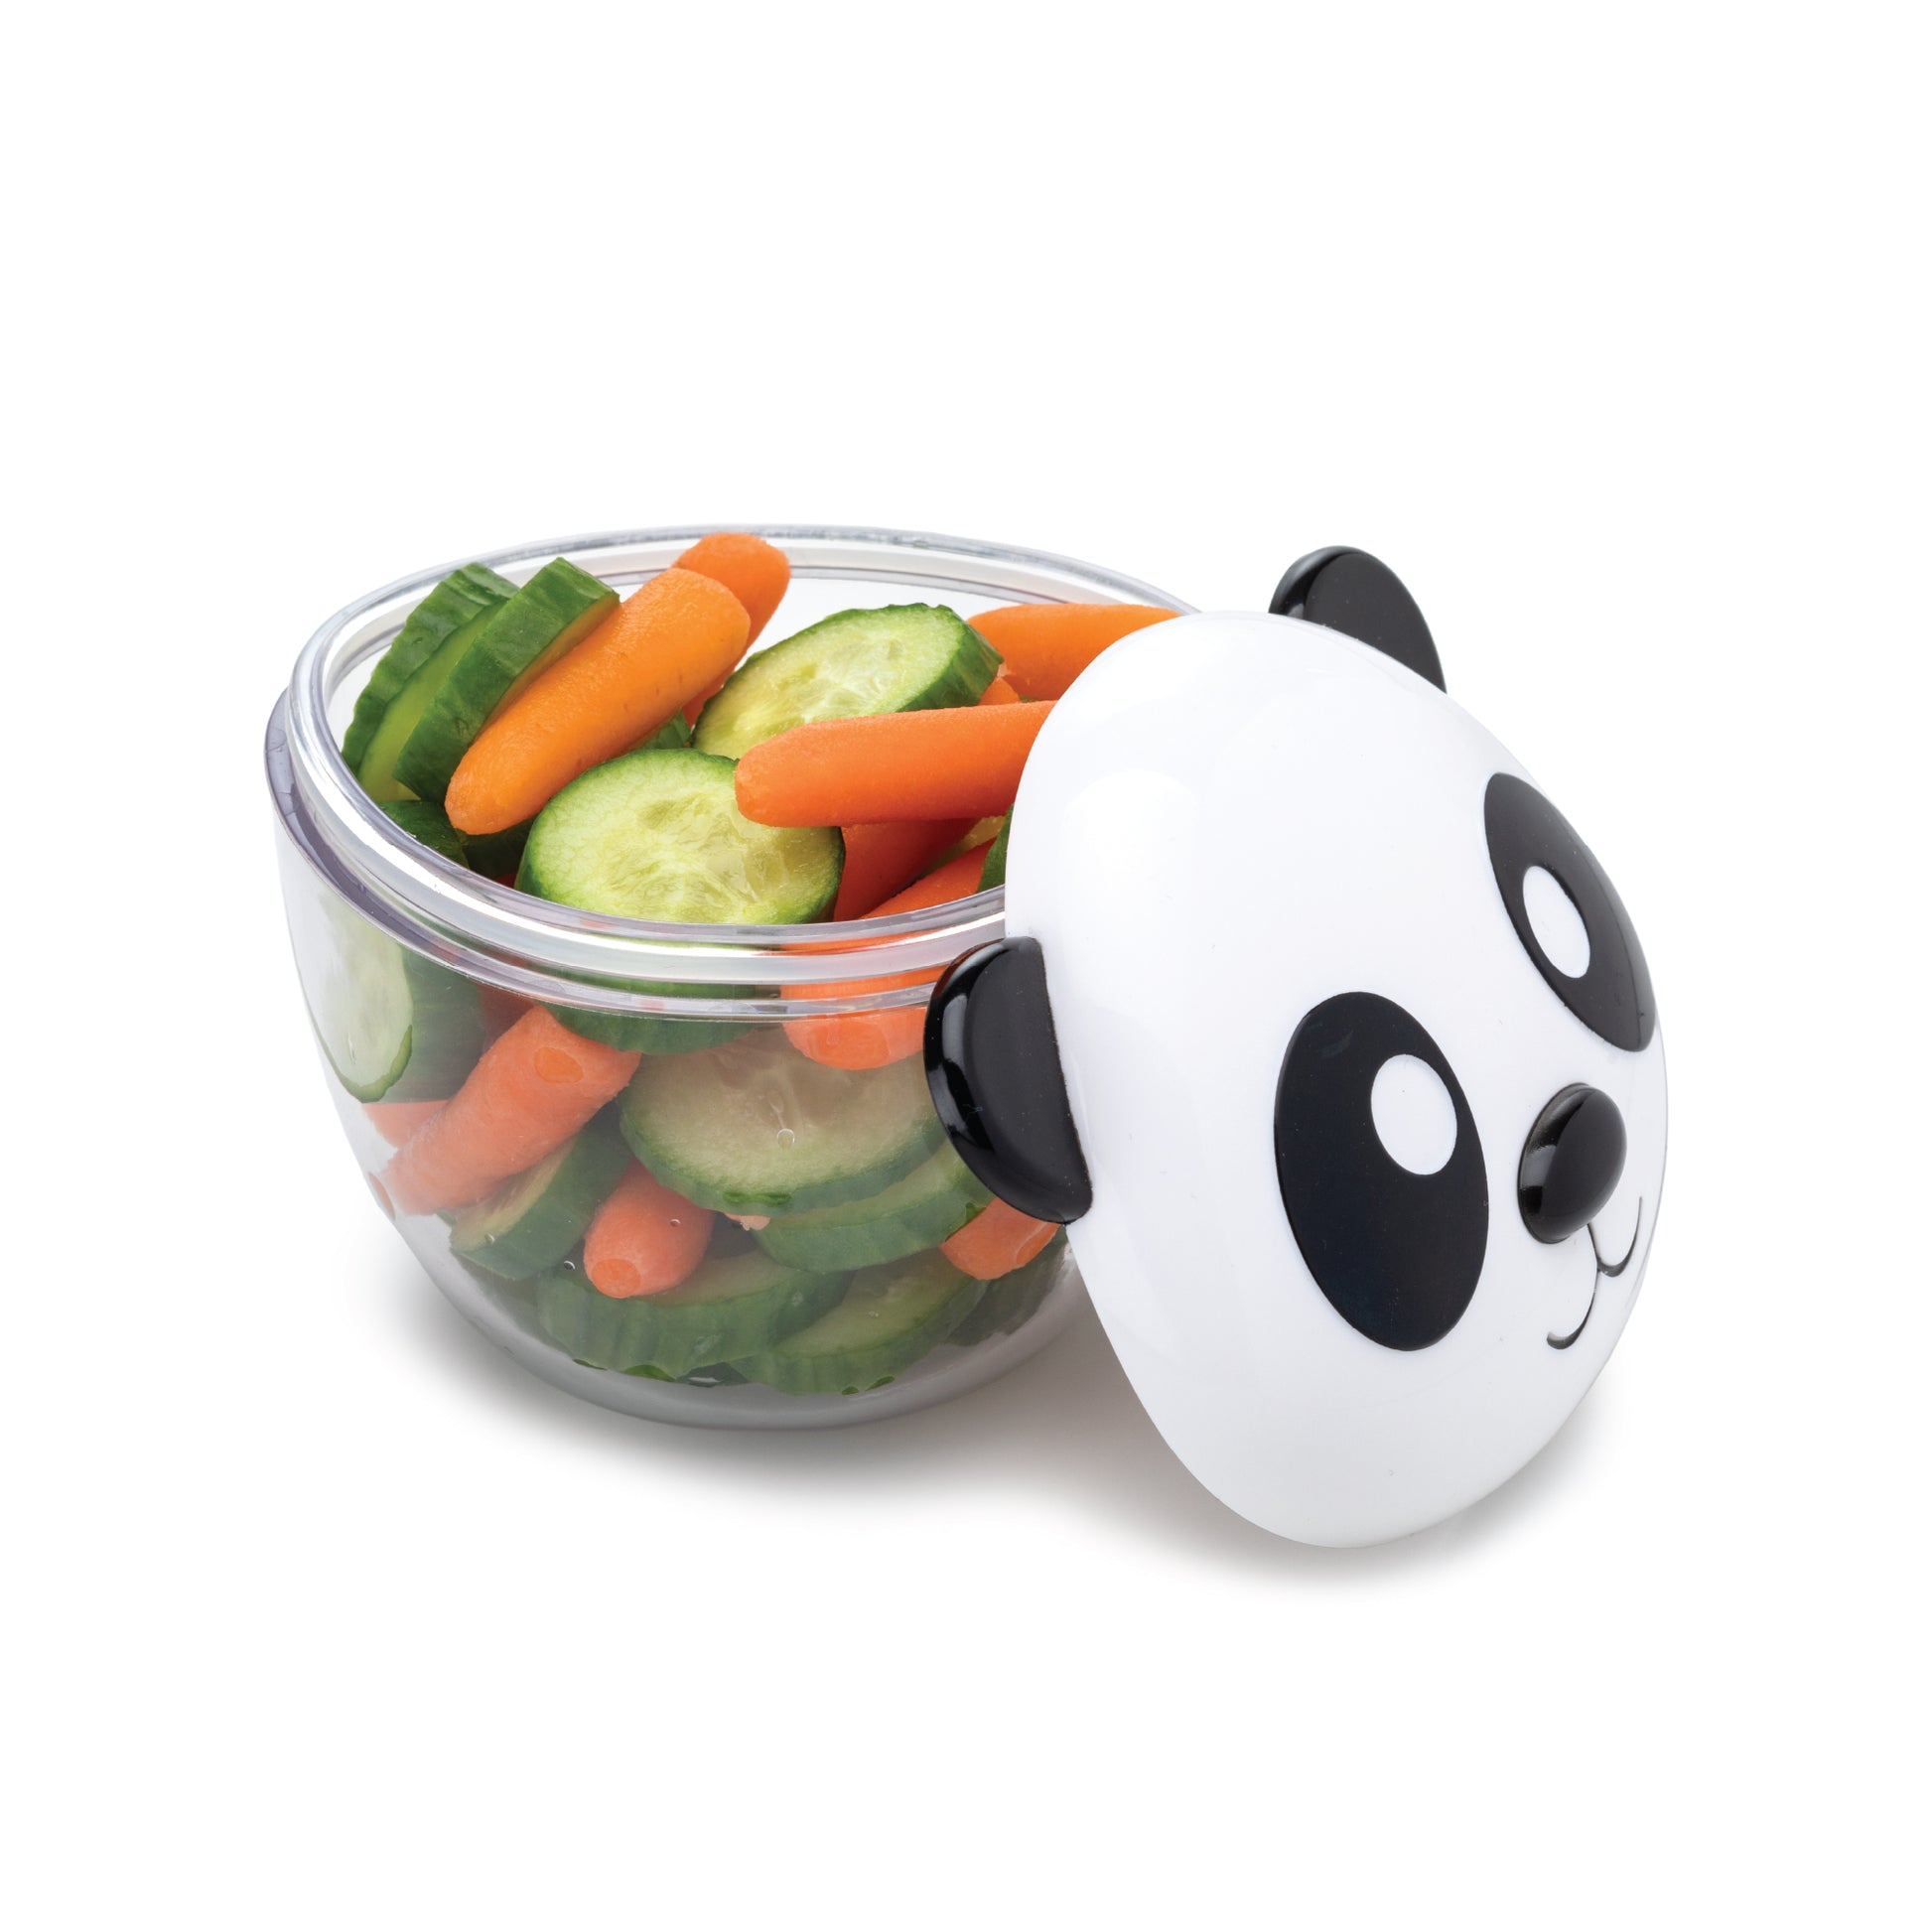 Melii Panda Snack Containers with Lids - Safe and Playful Food Storage for Toddlers and Kids